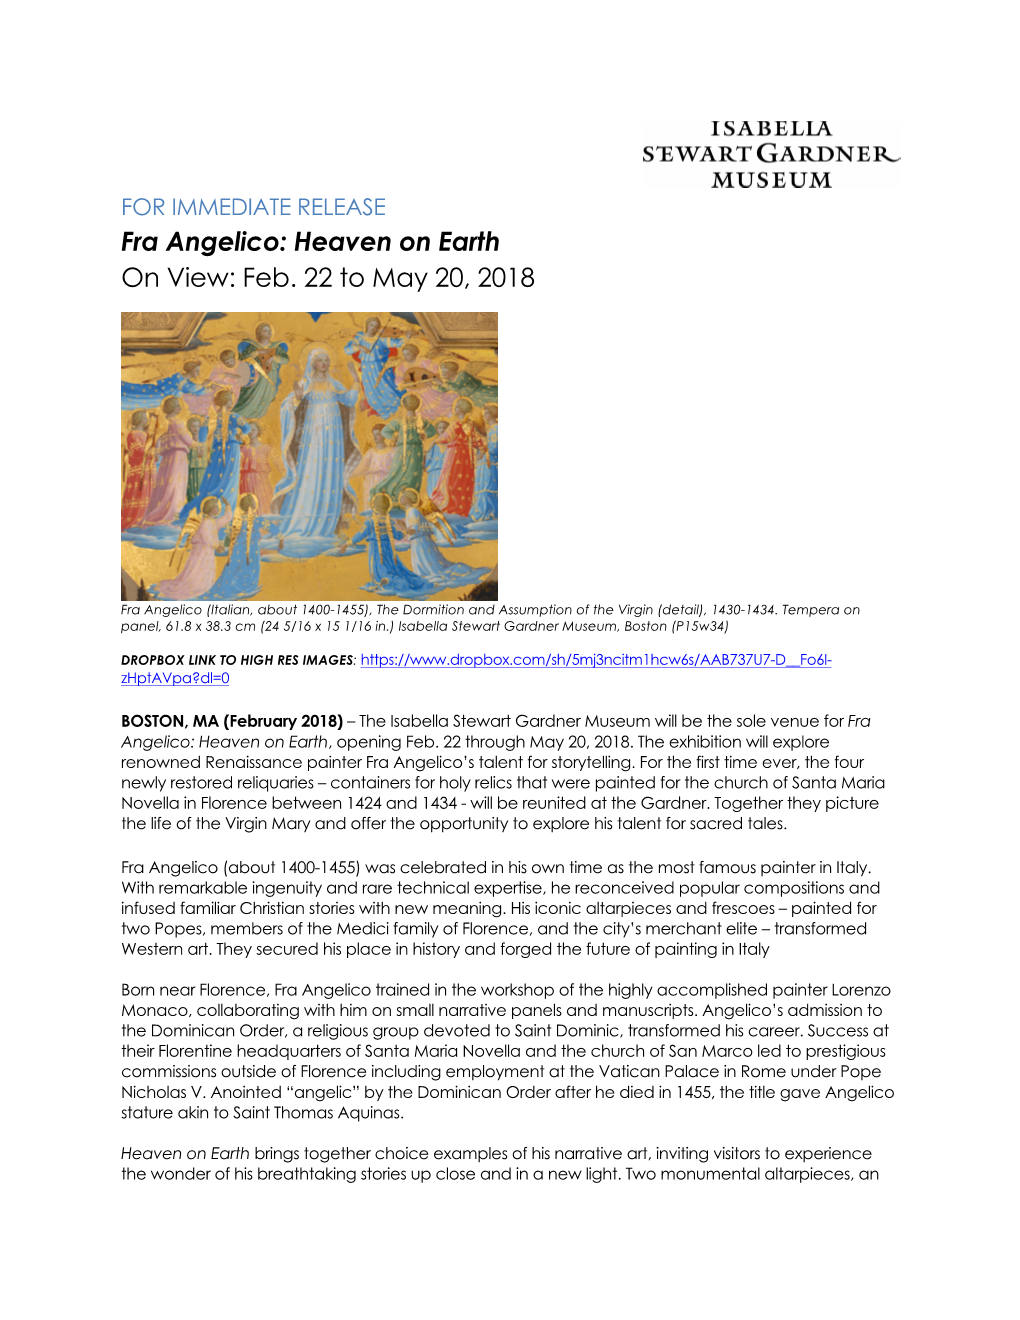 Fra Angelico: Heaven on Earth on View: Feb. 22 to May 20, 2018